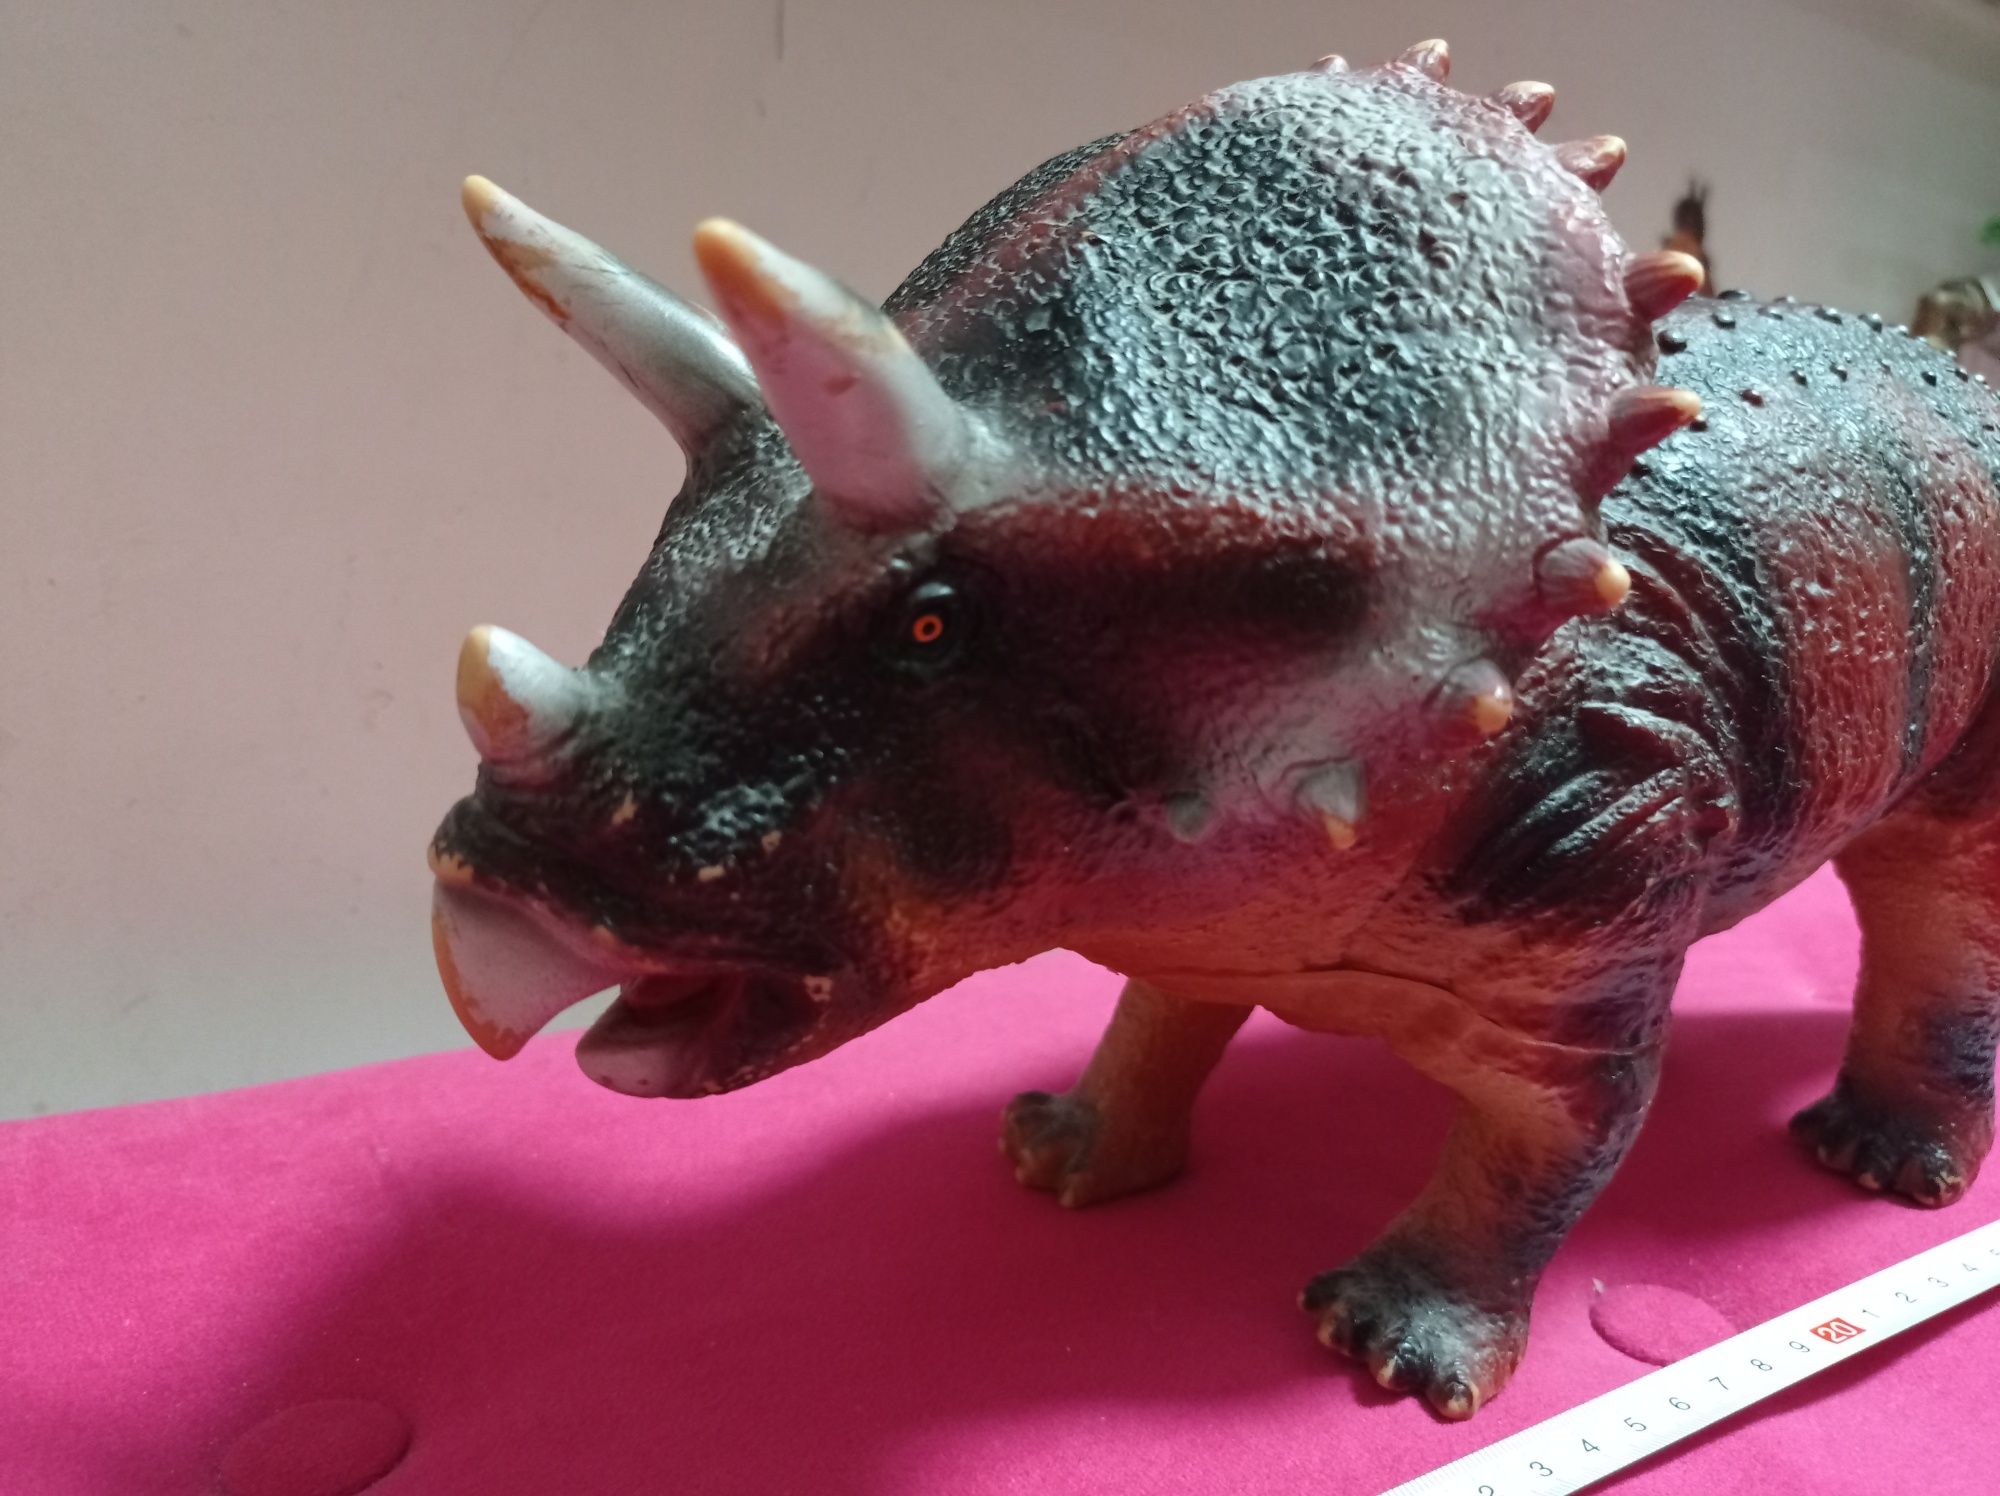 Gumowy triceratops